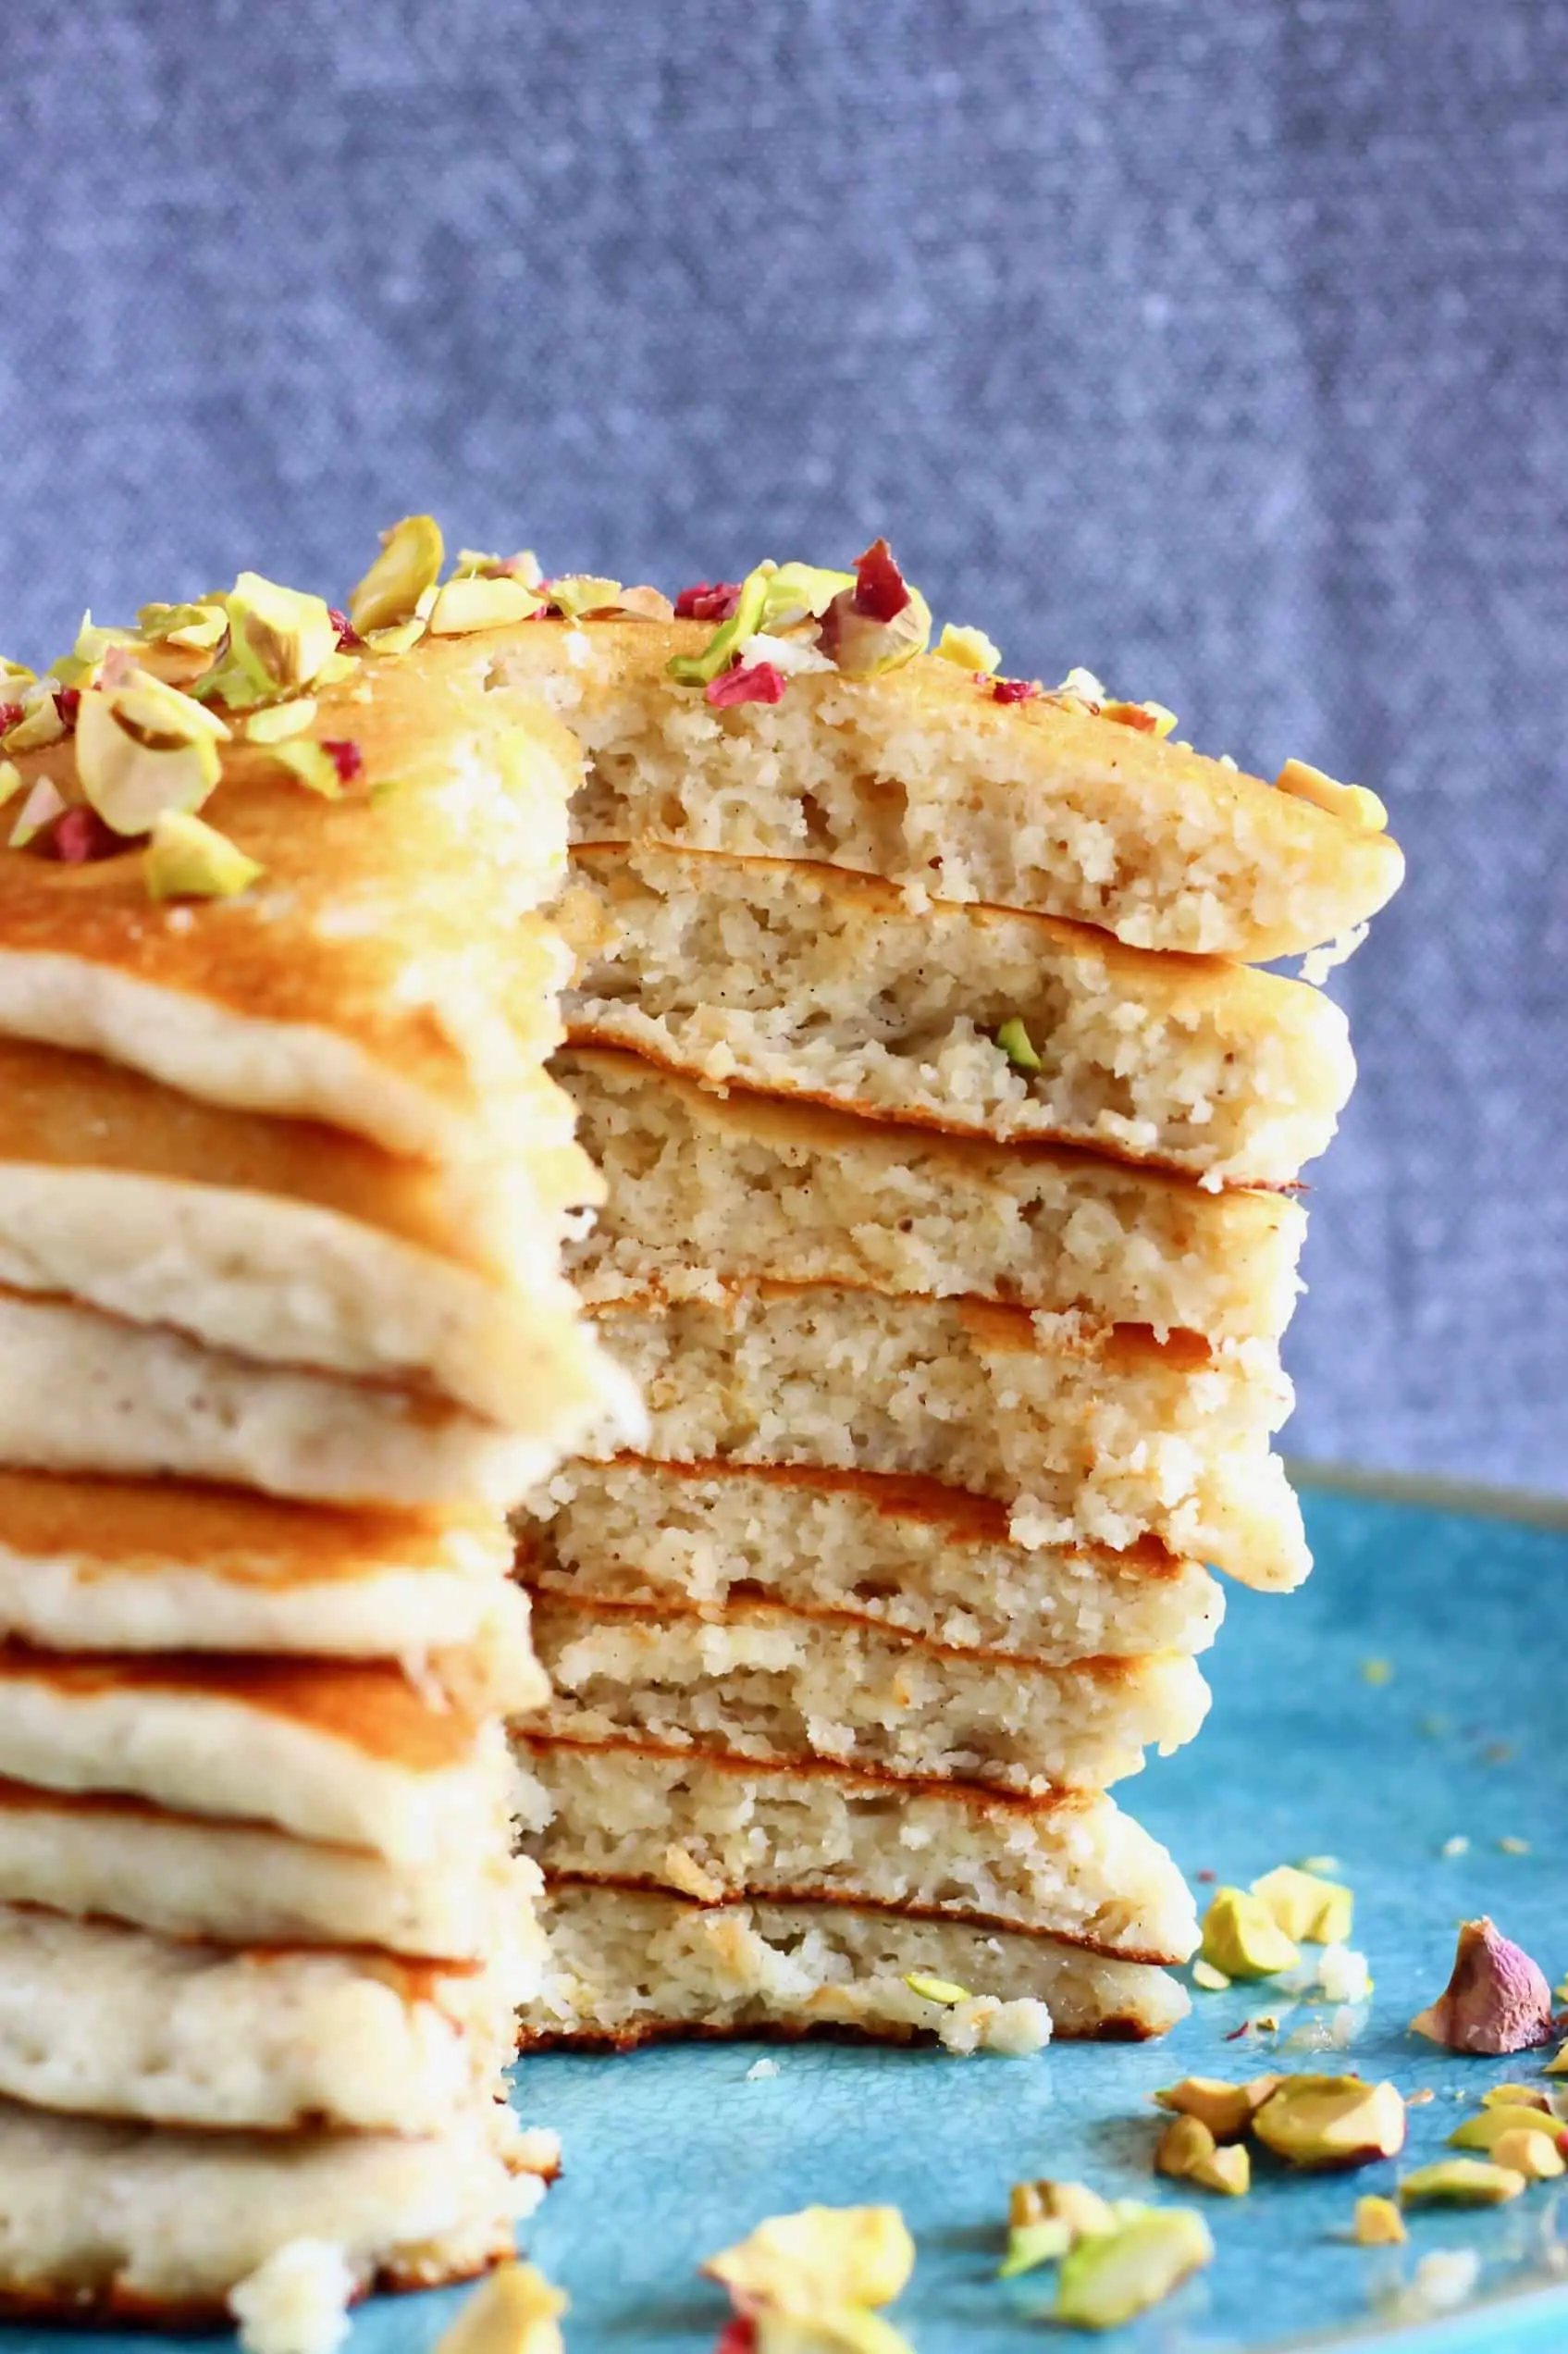 A stack of sliced gluten-free vegan oatmeal pancakes on a plate topped with chopped pistachios